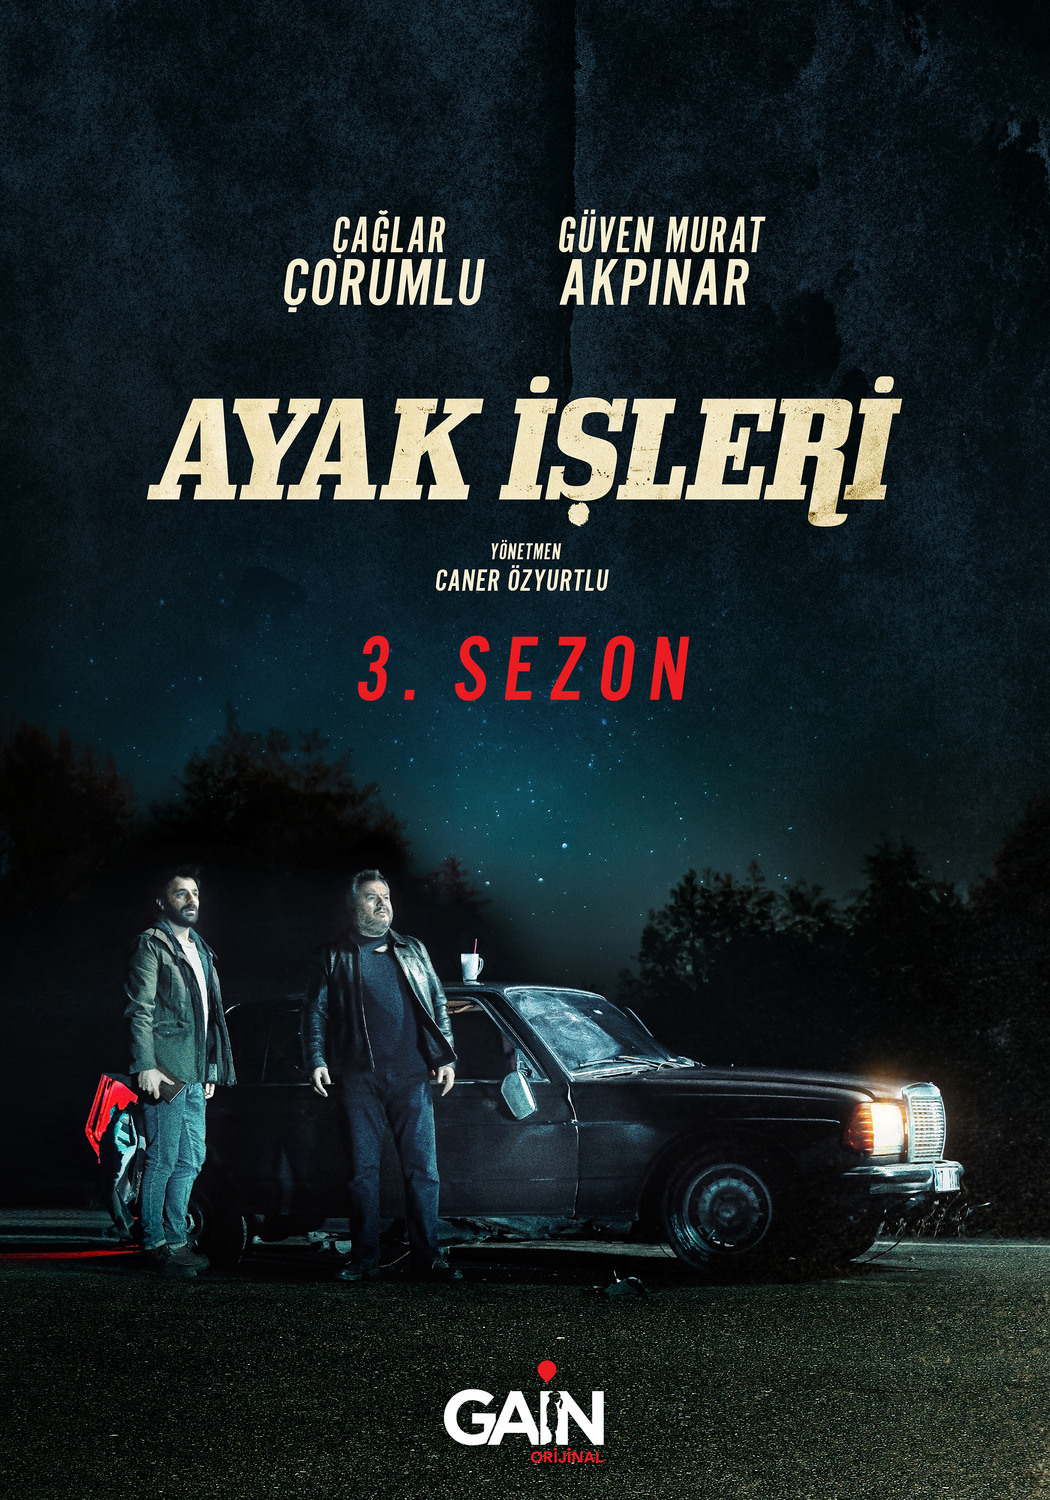 Extra Large TV Poster Image for Ayak Isleri (#6 of 8)